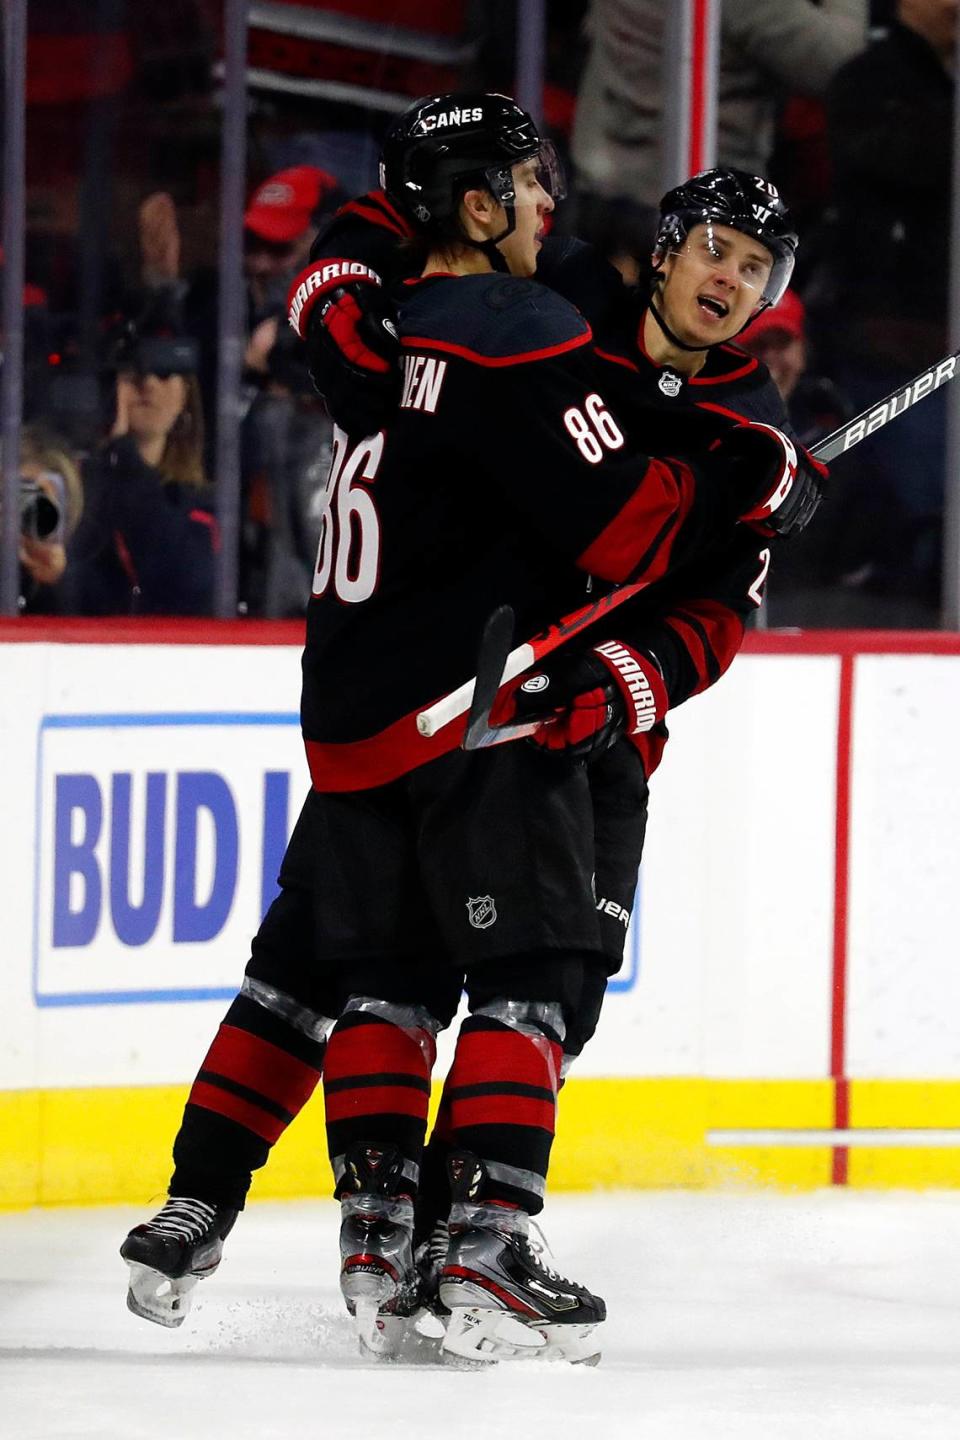 Carolina Hurricanes’ Teuvo Teravainen (86), of Finland, celebrates his goal with teammate Sebastian Aho (20), of Sweden, during the third period of an NHL hockey game against the Colorado Avalanche in Raleigh, N.C., Friday, Feb. 28, 2020. (AP Photo/Karl B DeBlaker)